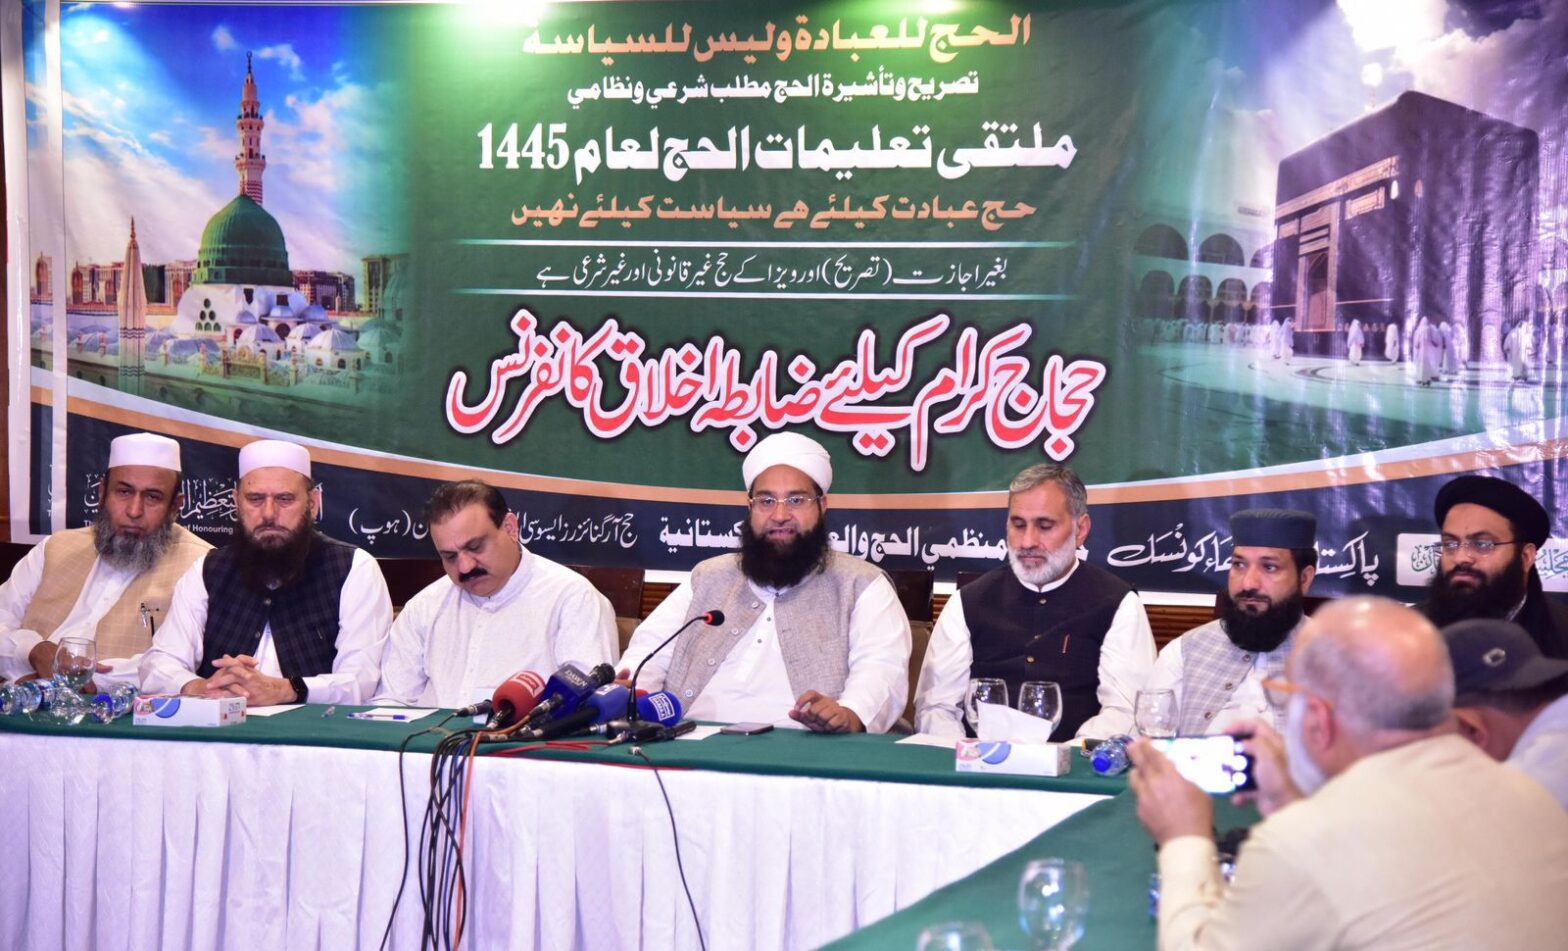 PUC, HOAP unveils code of conduct for hassle-free Hajj pilgrimage